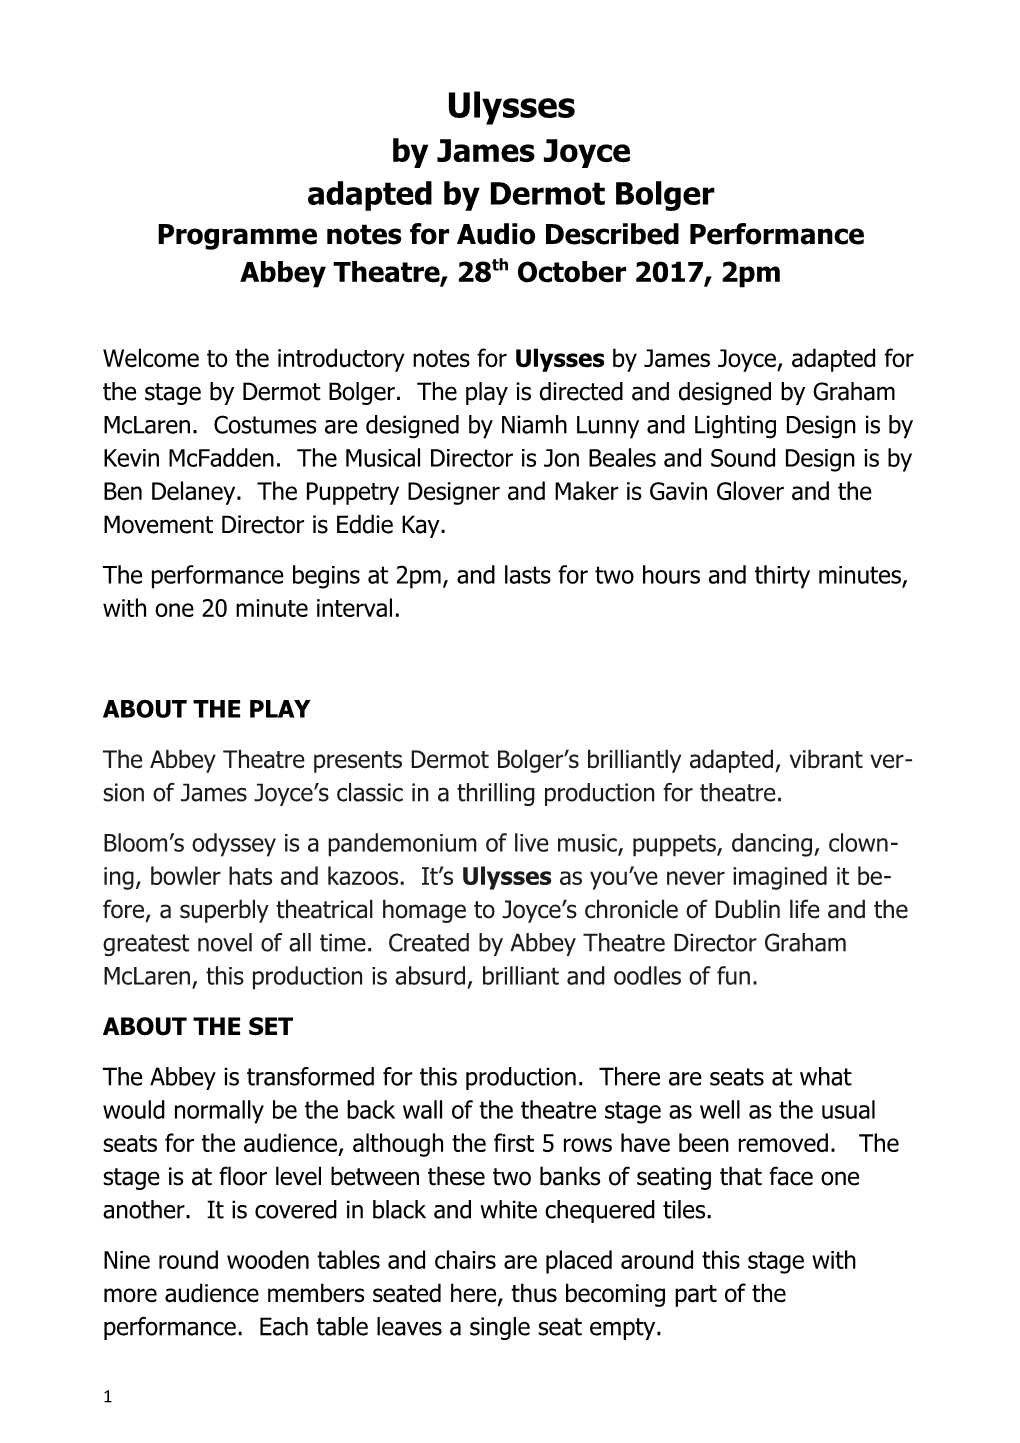 Programme Notes for Audio Described Performance